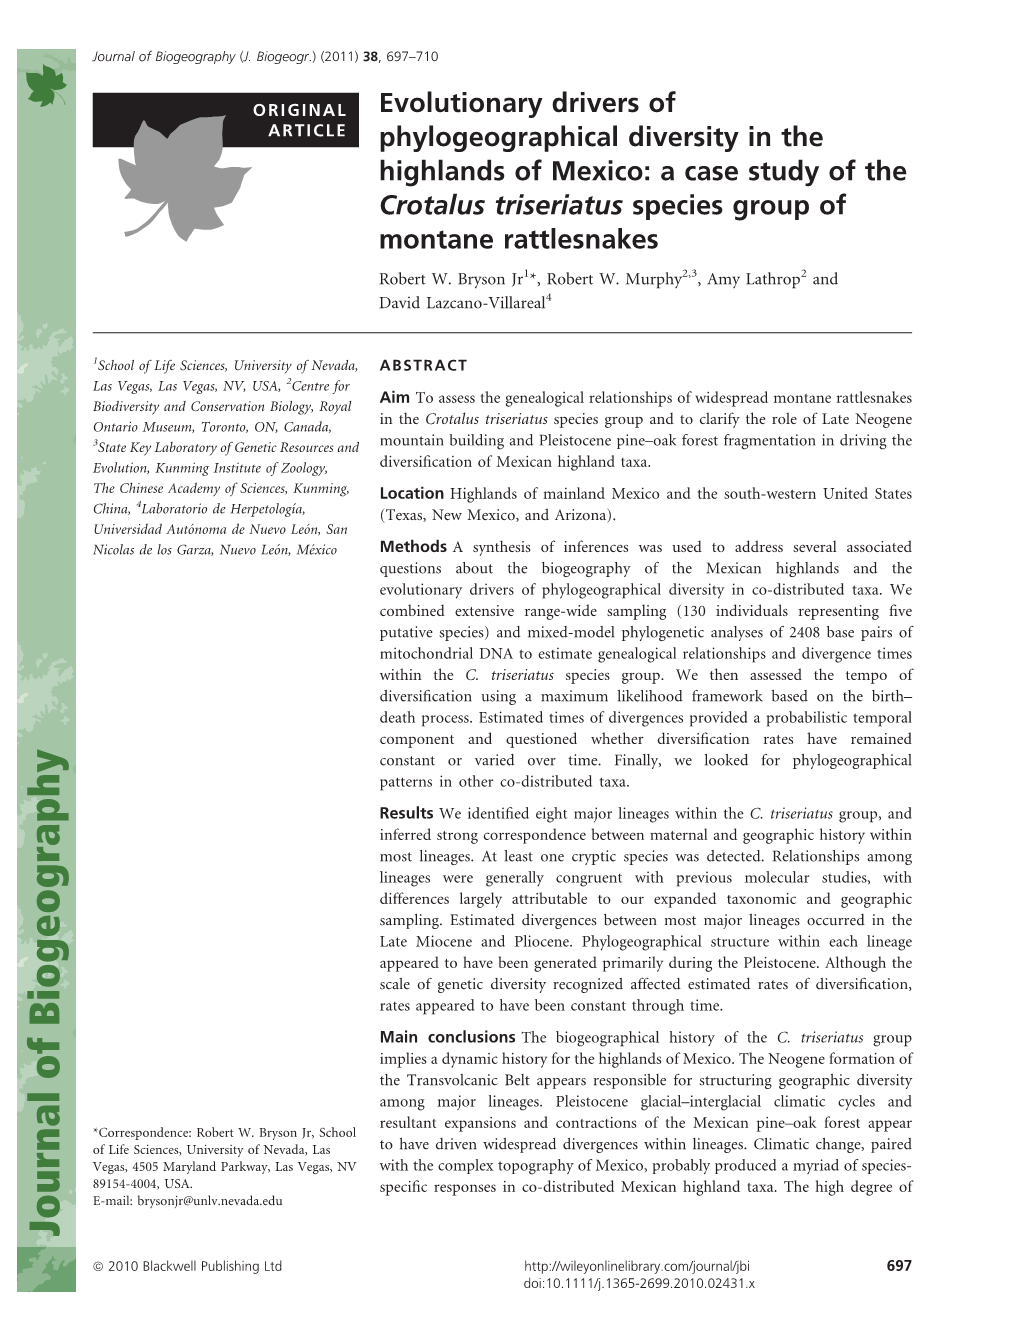 A Case Study of the Crotalus Triseriatus Species Group of Montane Rattlesnakes Robert W